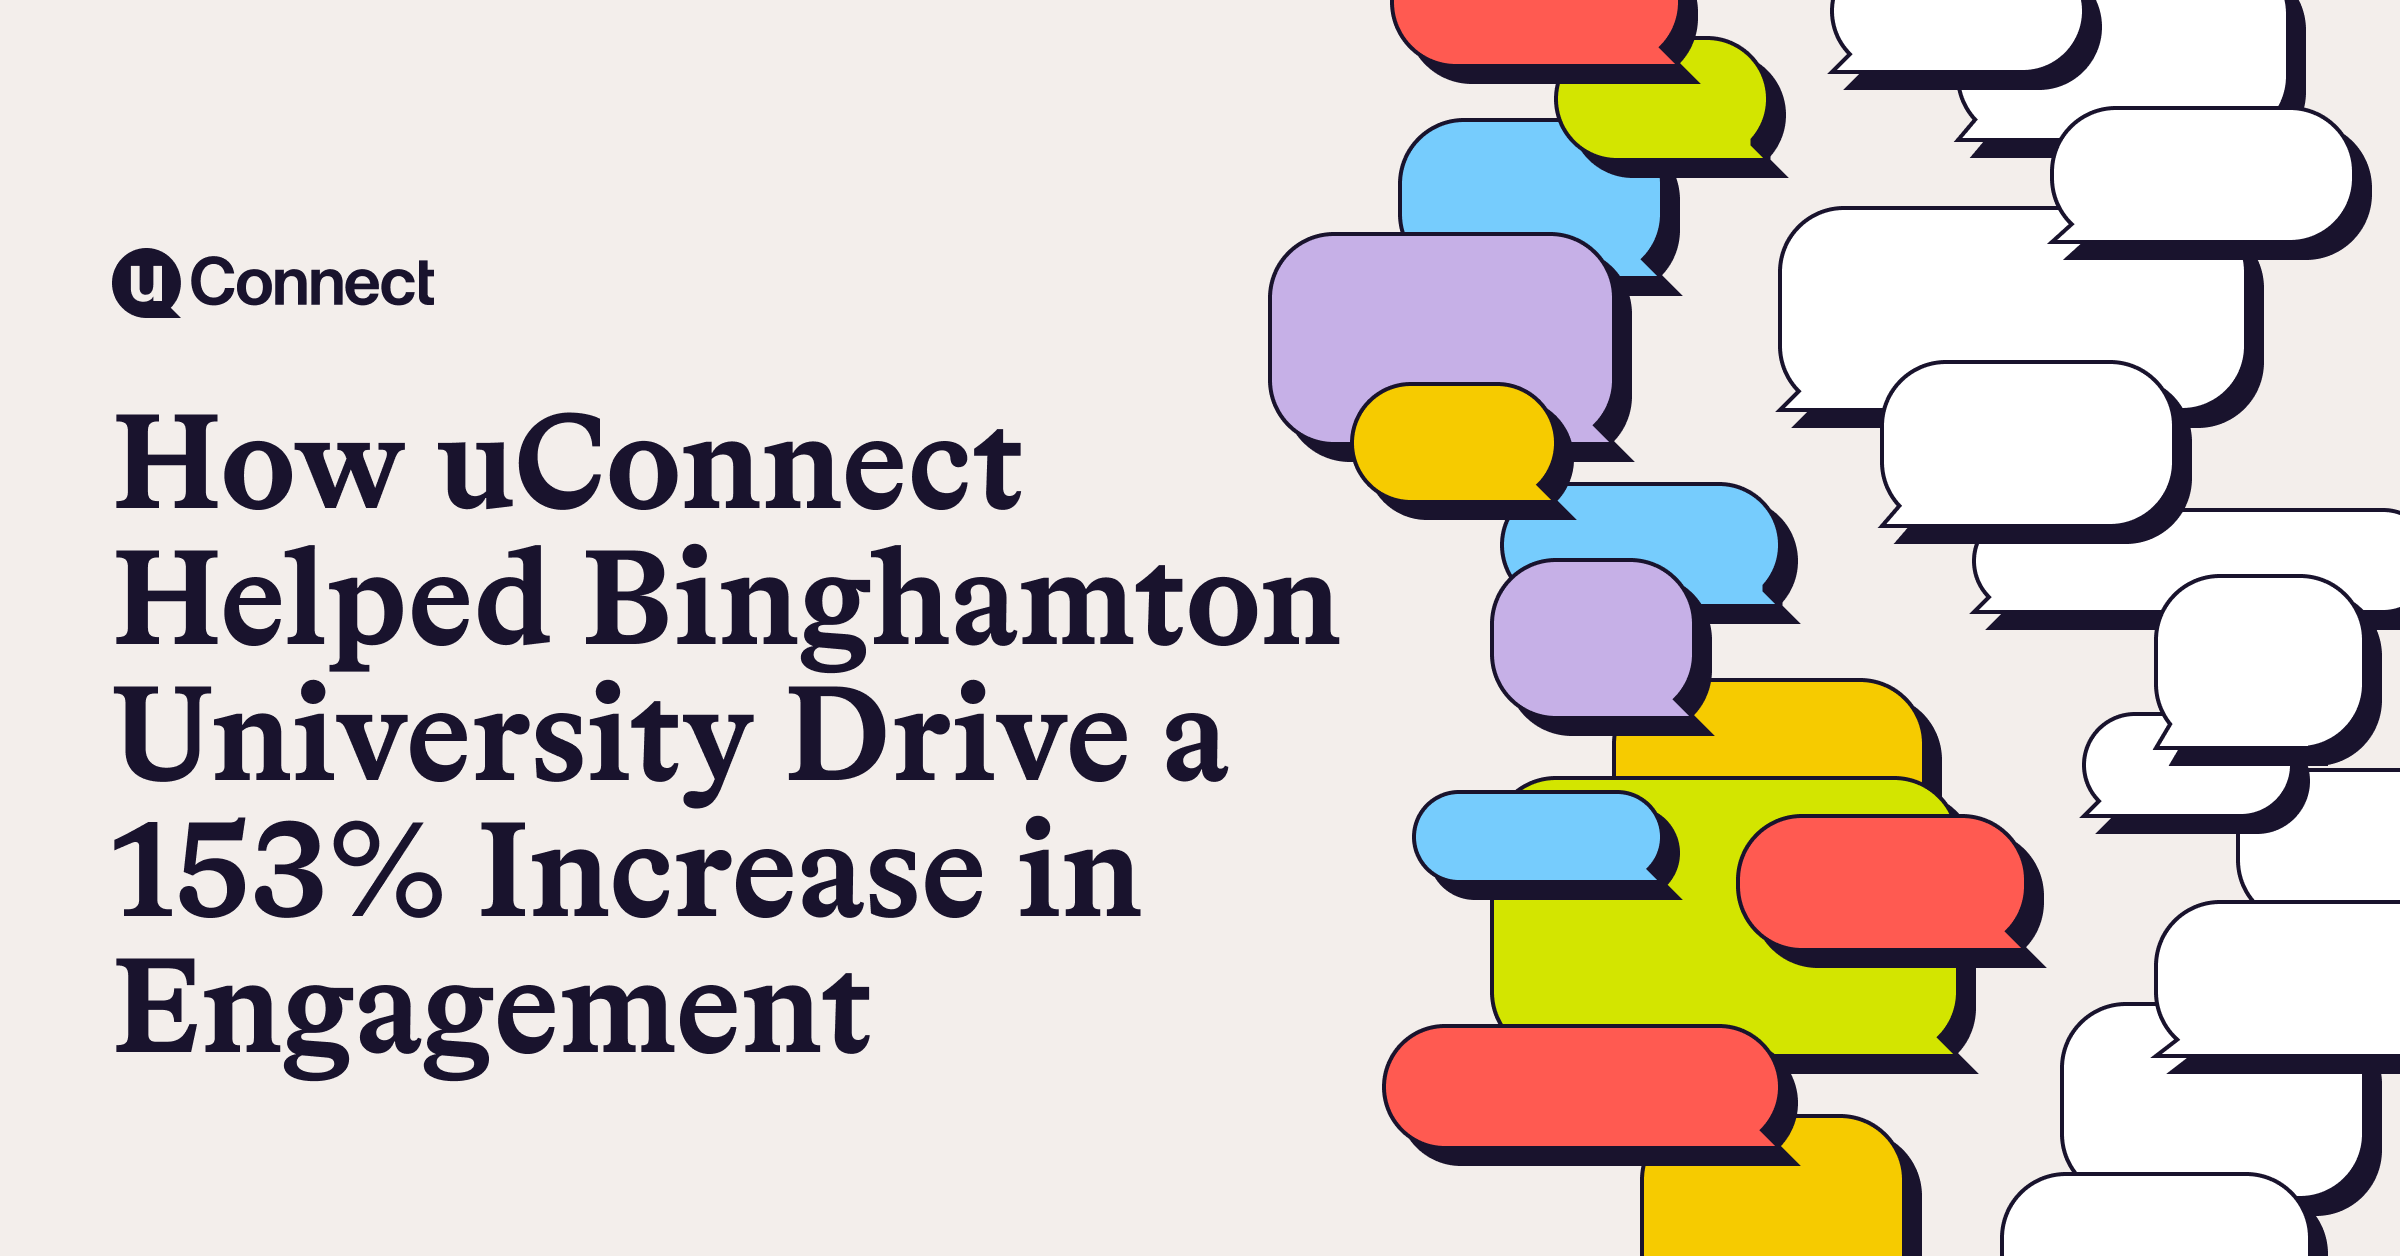 How uConnect helped Binghamton University Scale their Work and drive a 153% increase in Engagement